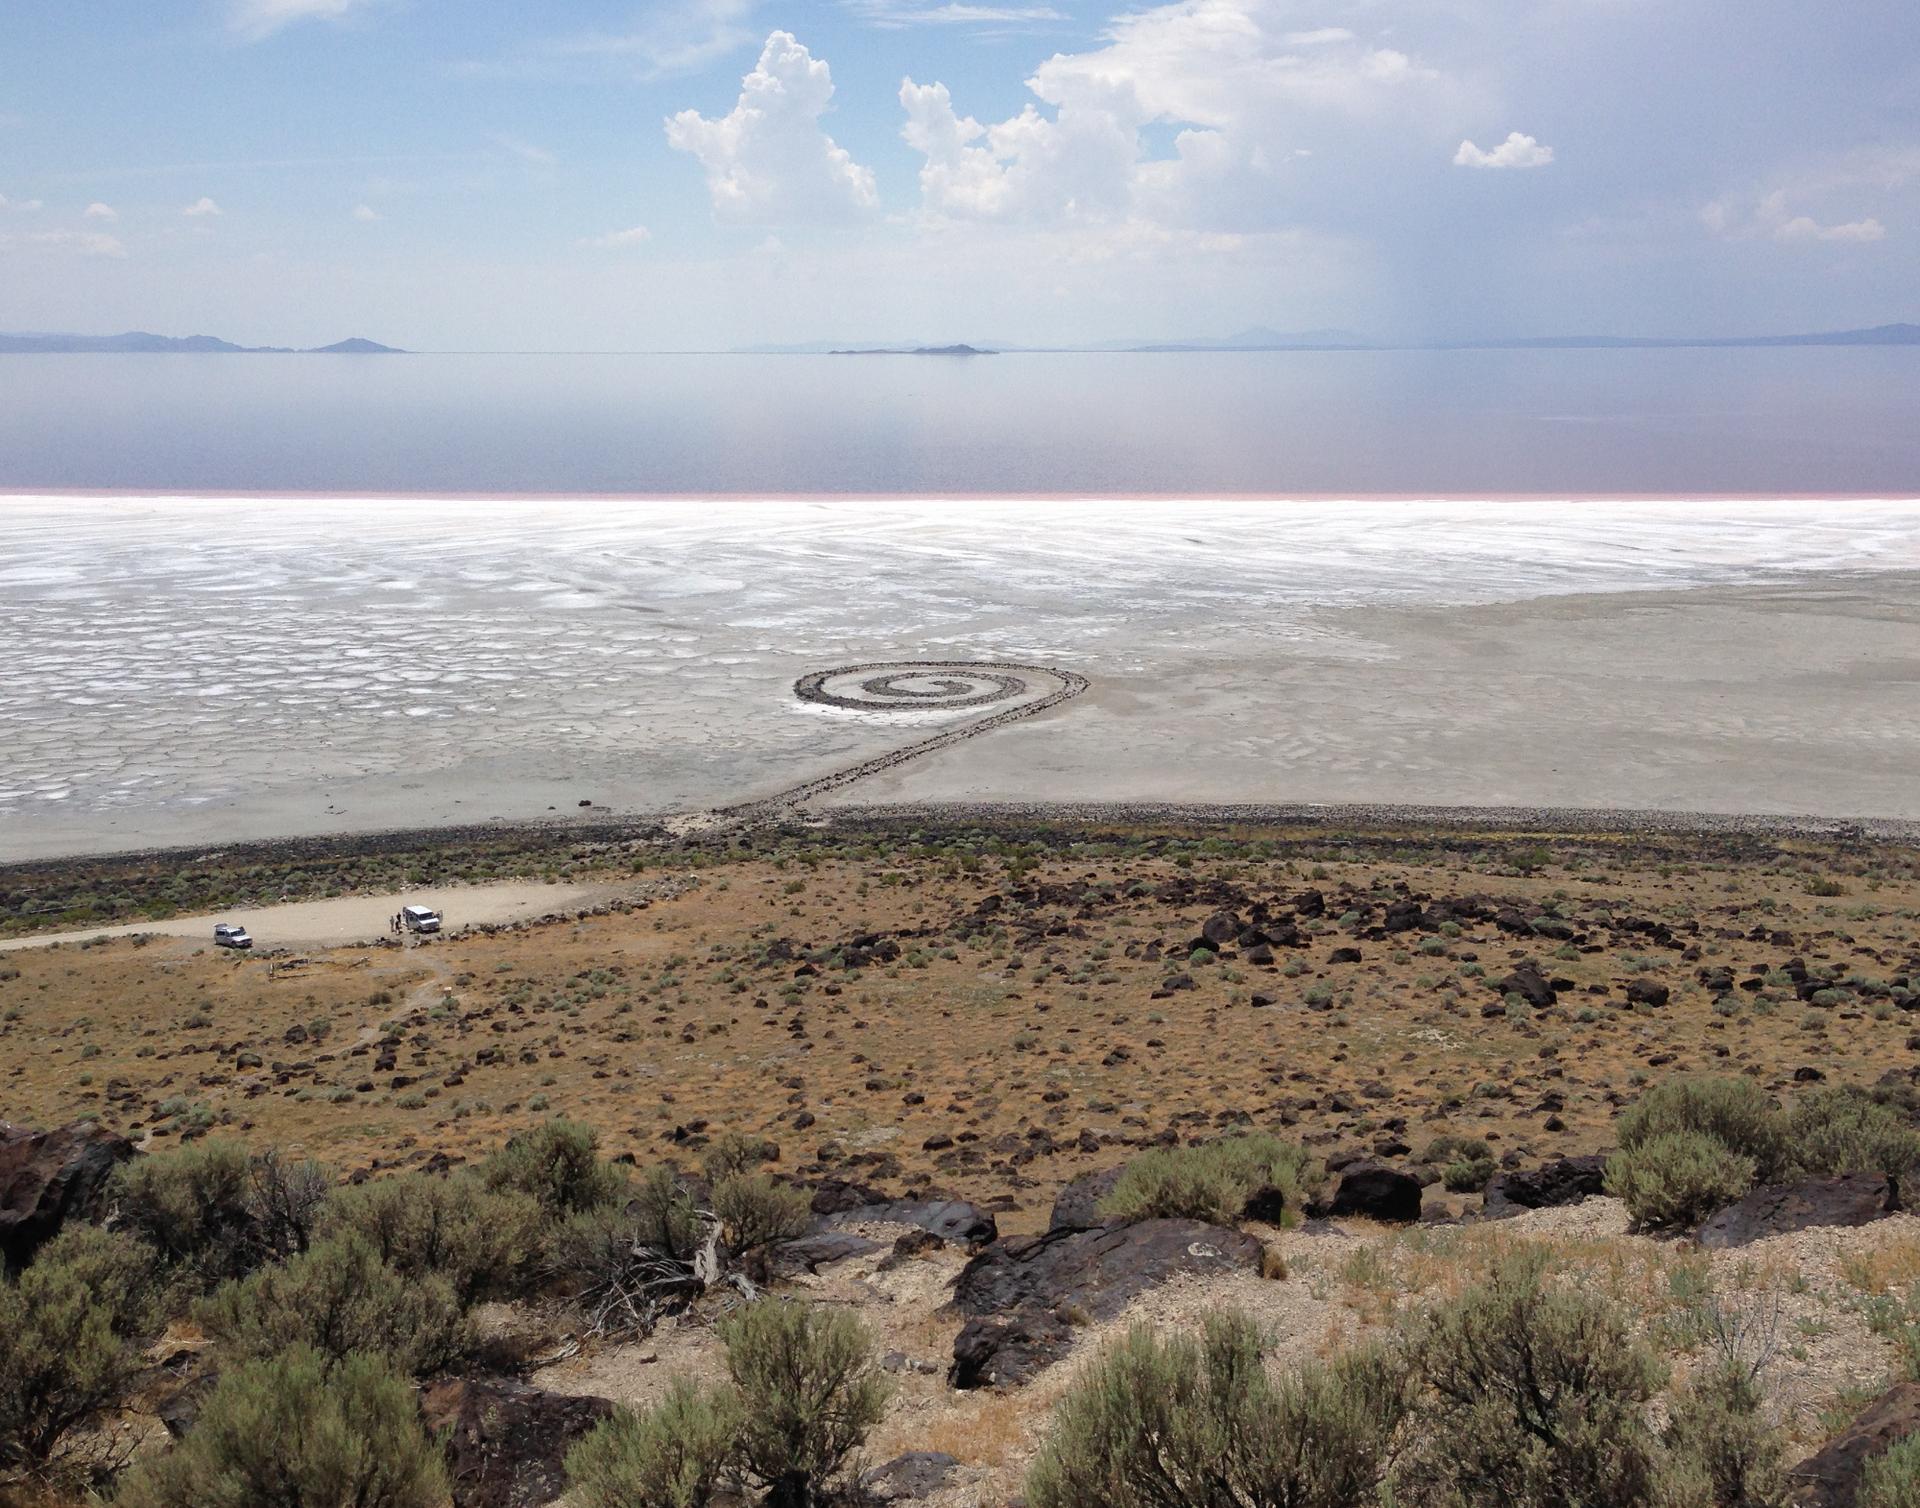 Spiral Jetty in the distance